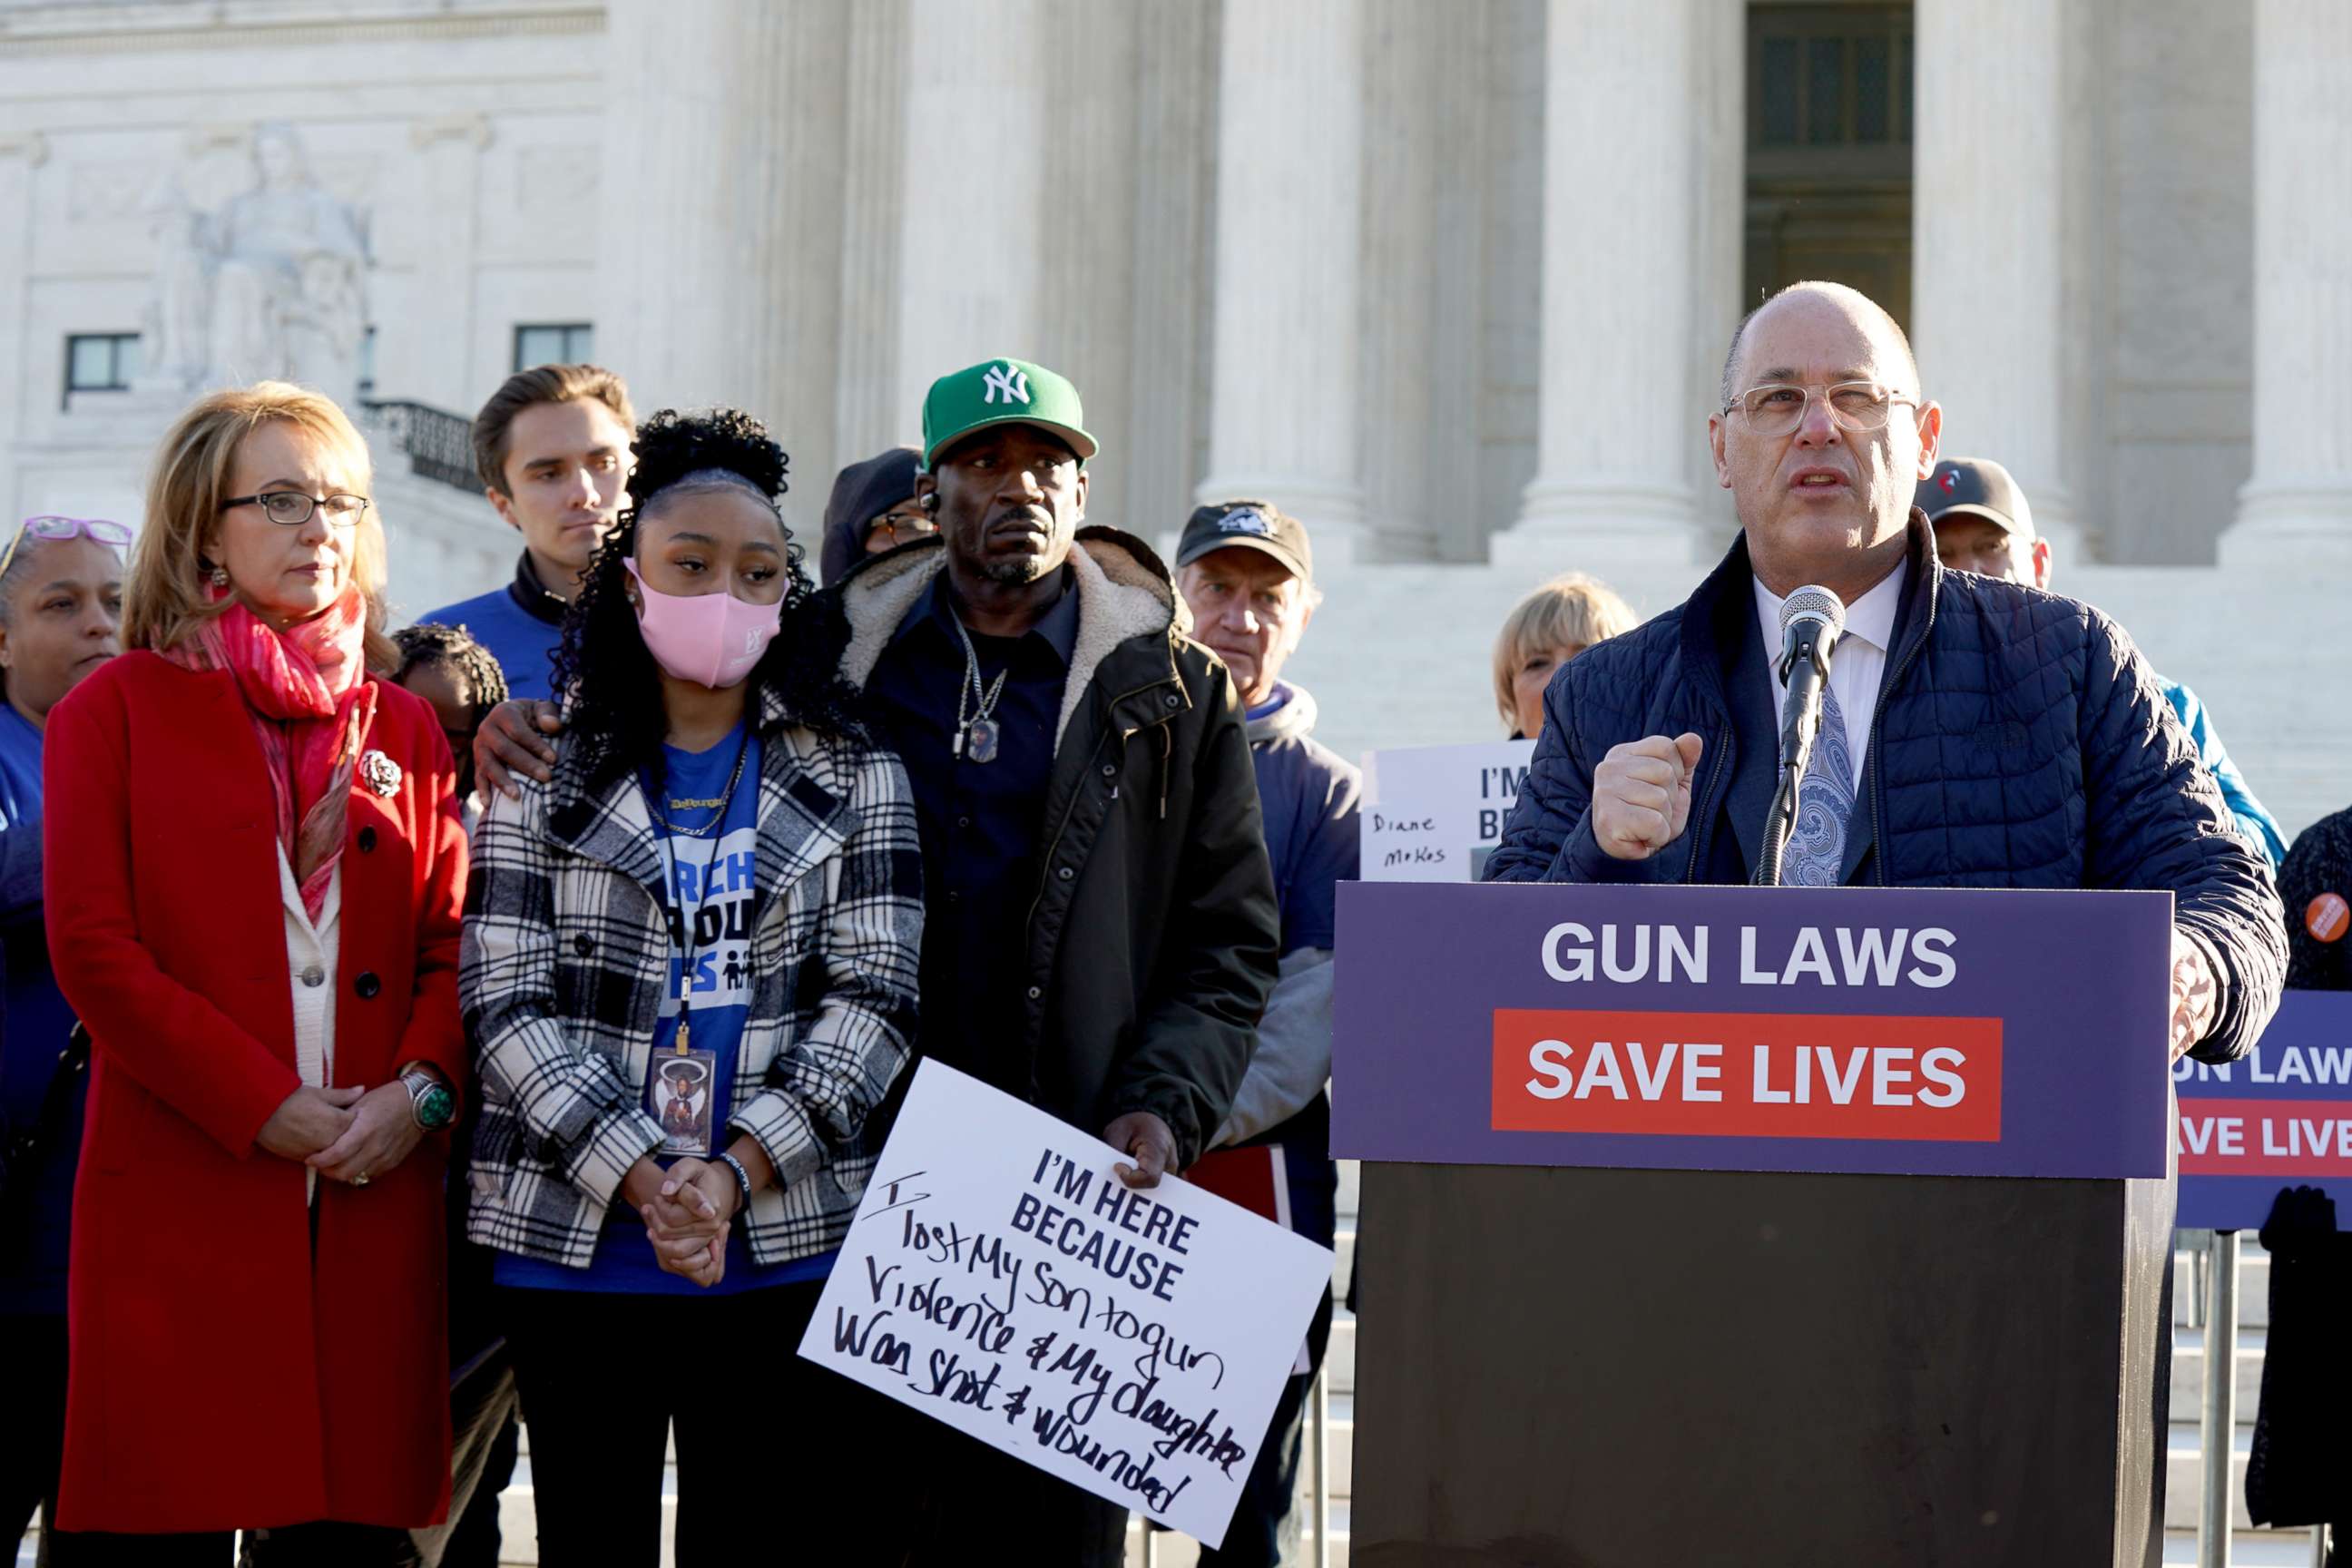 PHOTO: Fred Guttenberg speaks as Gabby Giffords, wearing a red coat, stands with other gun violence survivors gathered in front of the Supreme Court ahead of oral argument in NYSRPA v. Bruen on Nov. 3, 2021 in Washington, D.C.